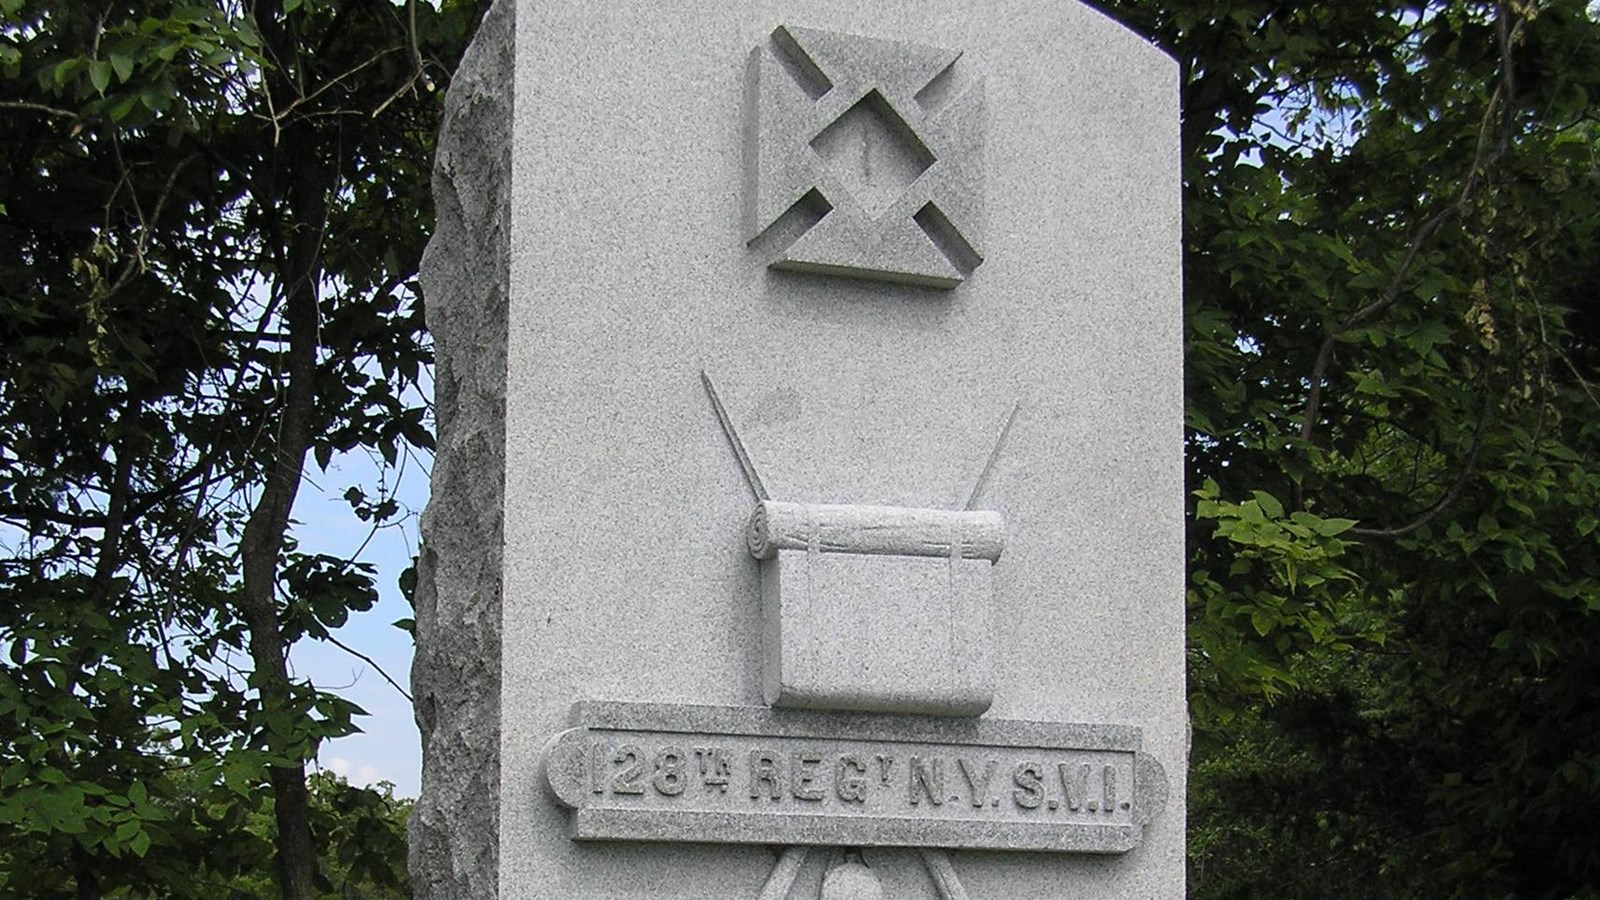 A tall stone lozenge with a square cross and arms is inscribed 128th REGt NYSVI.